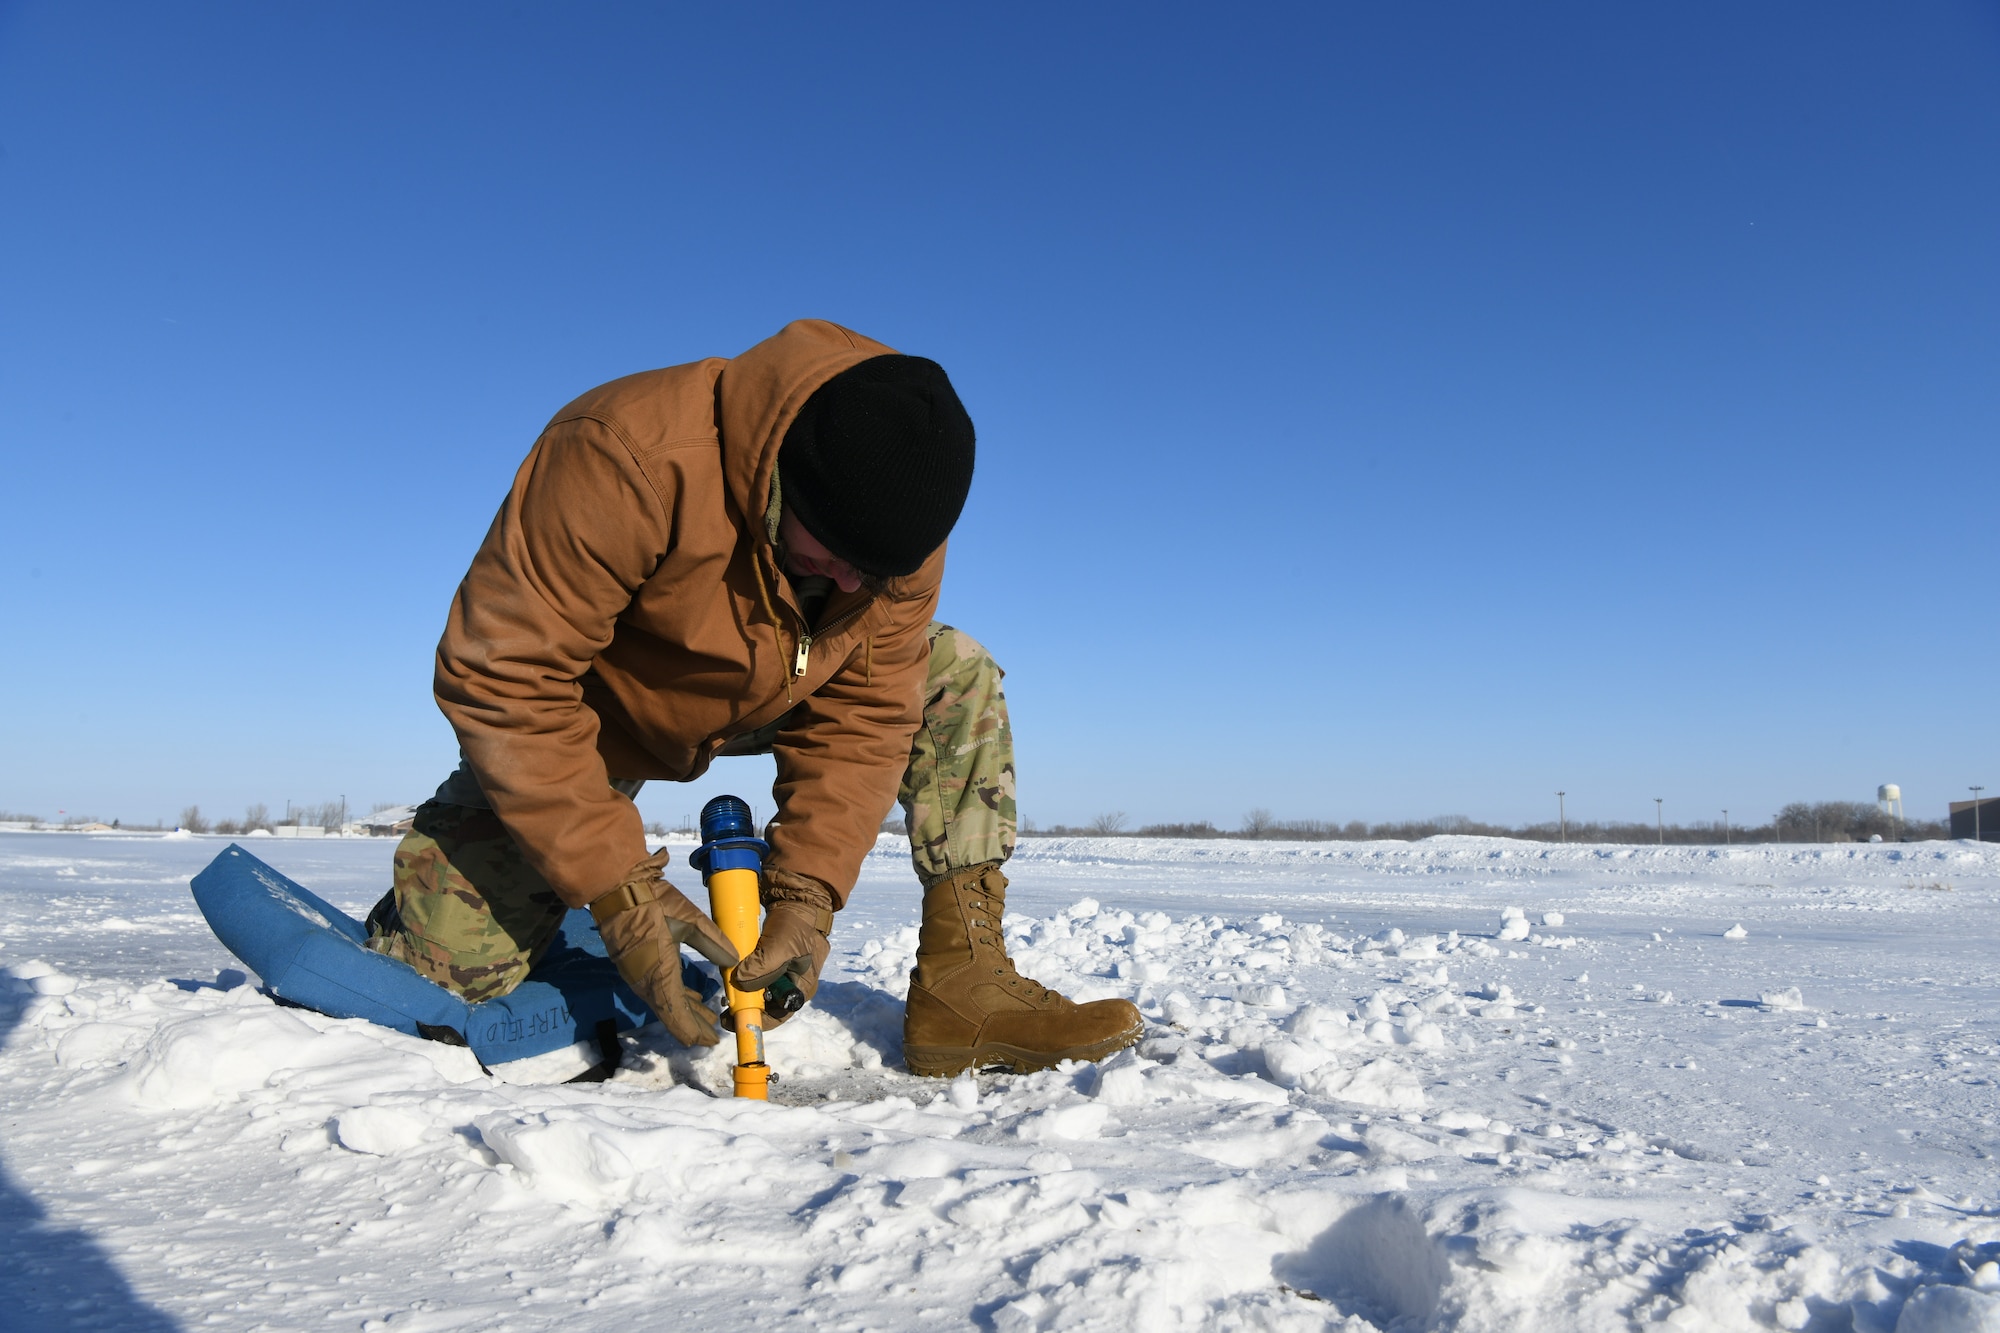 A man wearing a brown coat kneels in snow to fix a light.